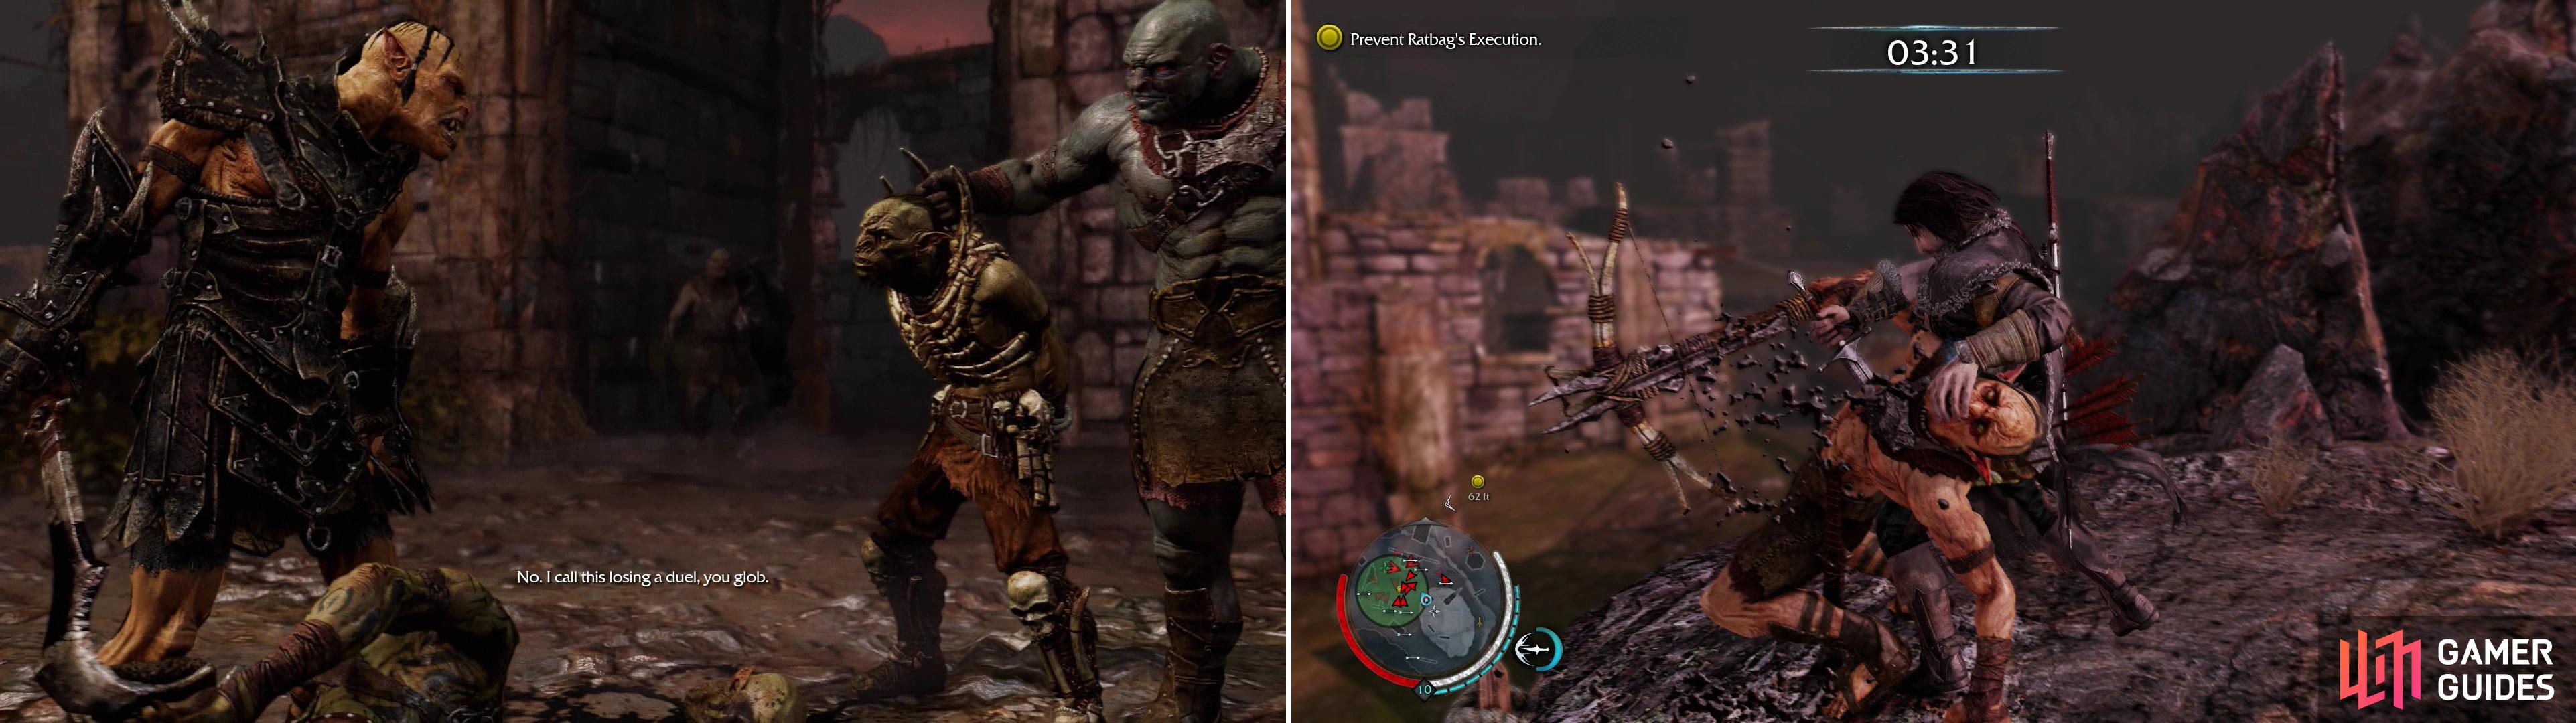 Middle-earth: Shadow of Mordor Achievements and Screenshots